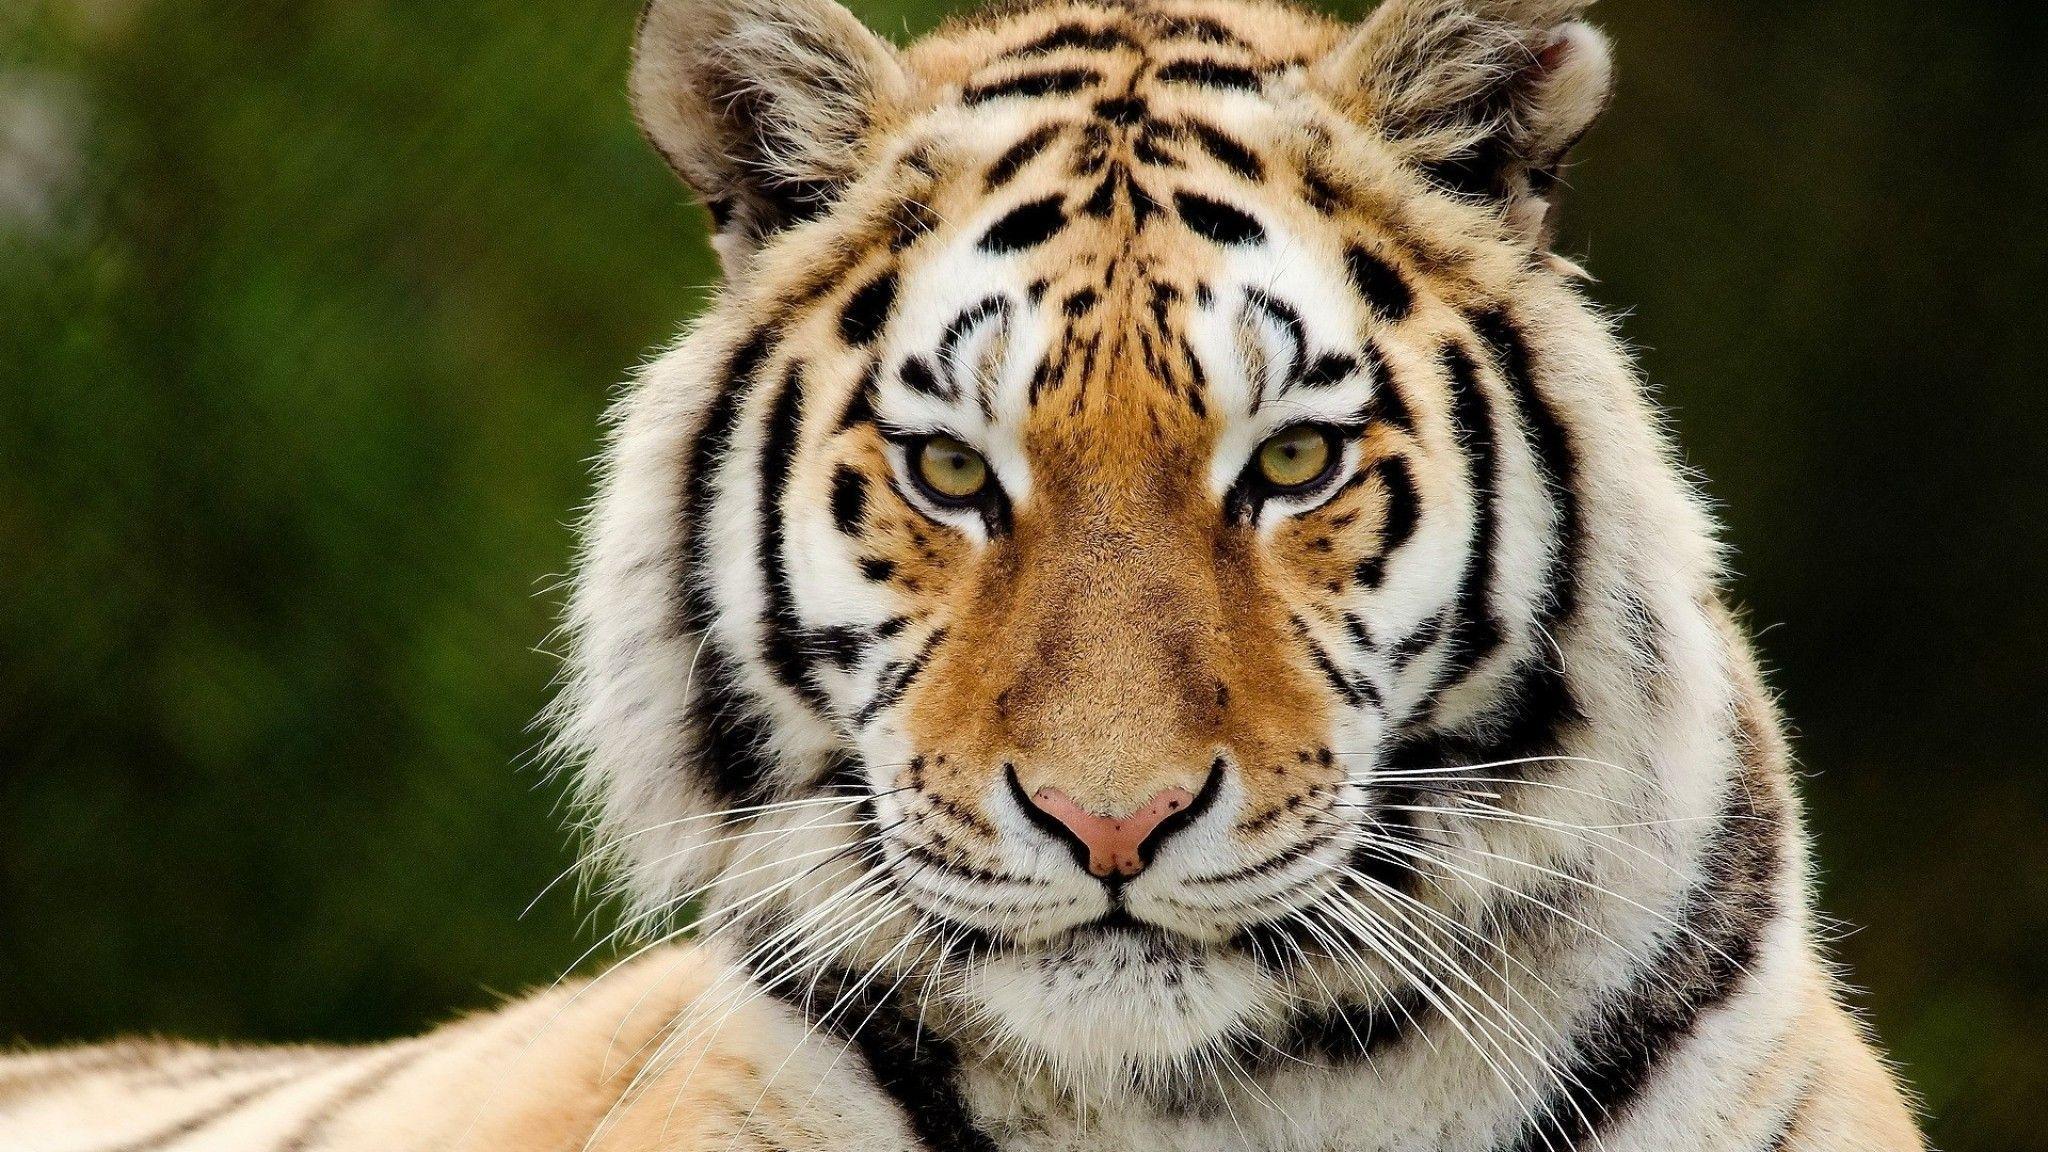 Big Face Of Tiger Hd Wallpapers